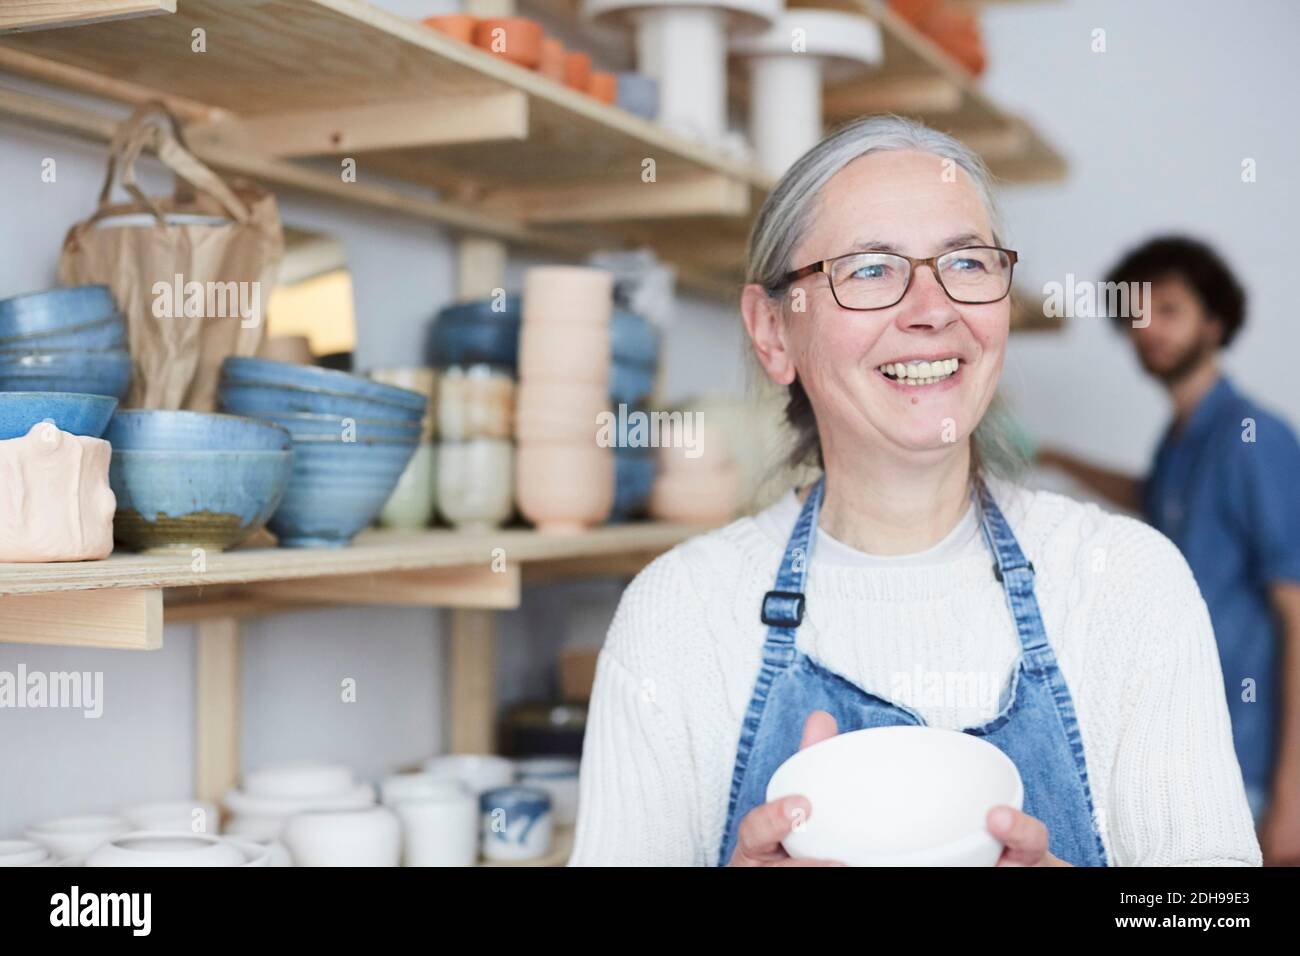 Smiling mature woman looking away while holding bowl in pottery class Stock Photo